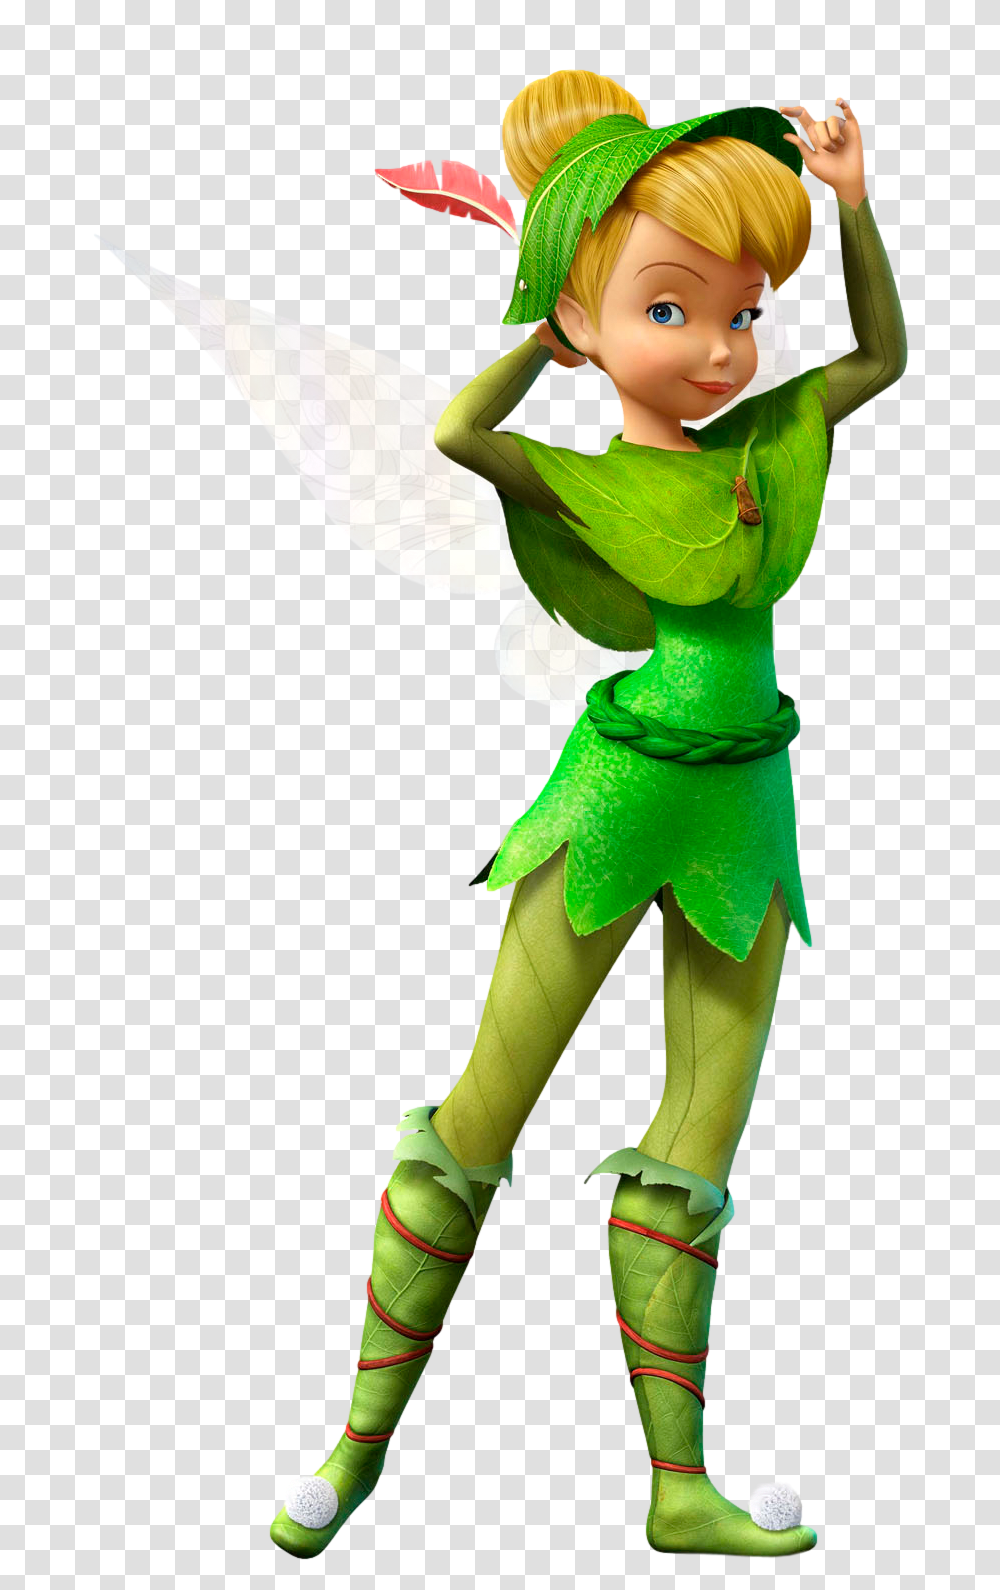 Tinker Bell Image Tinkerbell Fairies, Elf, Person, Toy, Sweets Transparent Png